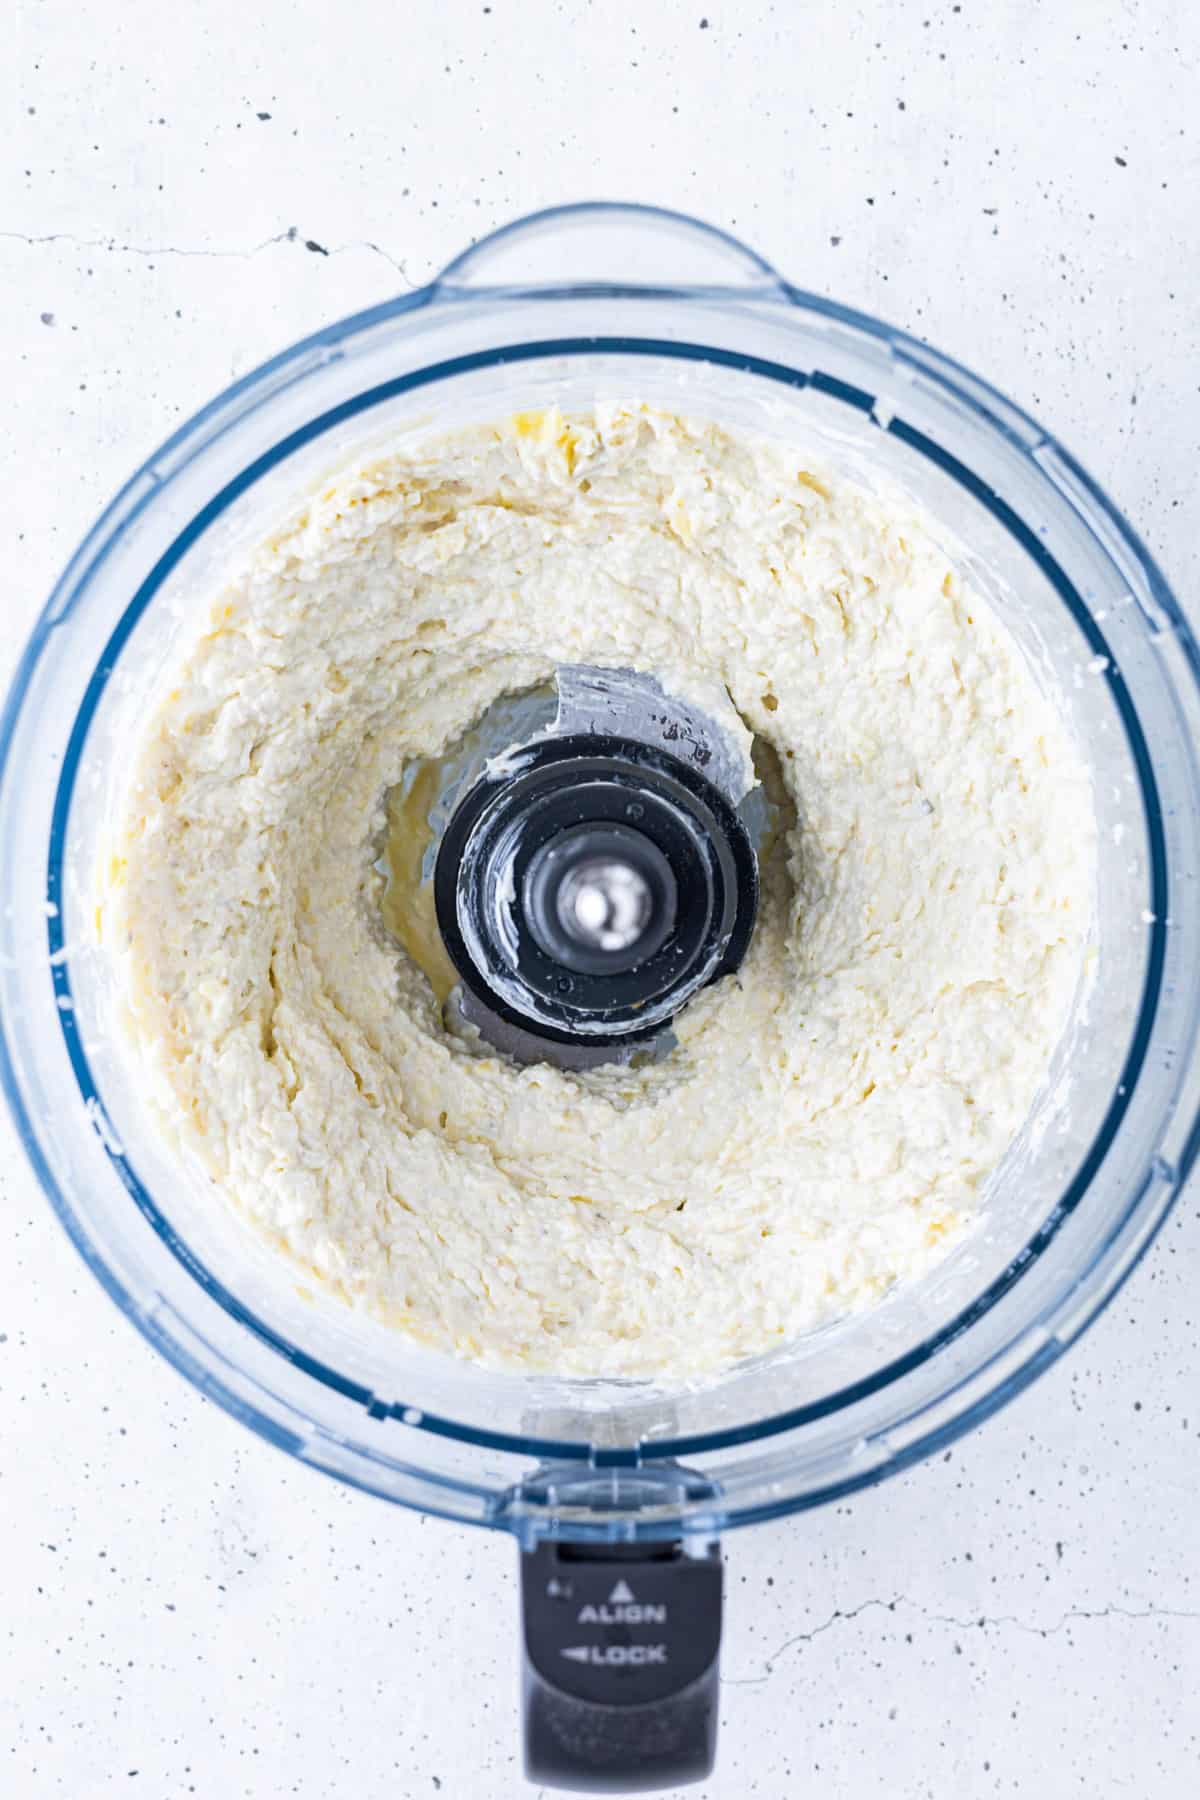 Dip blended in a food processor container.